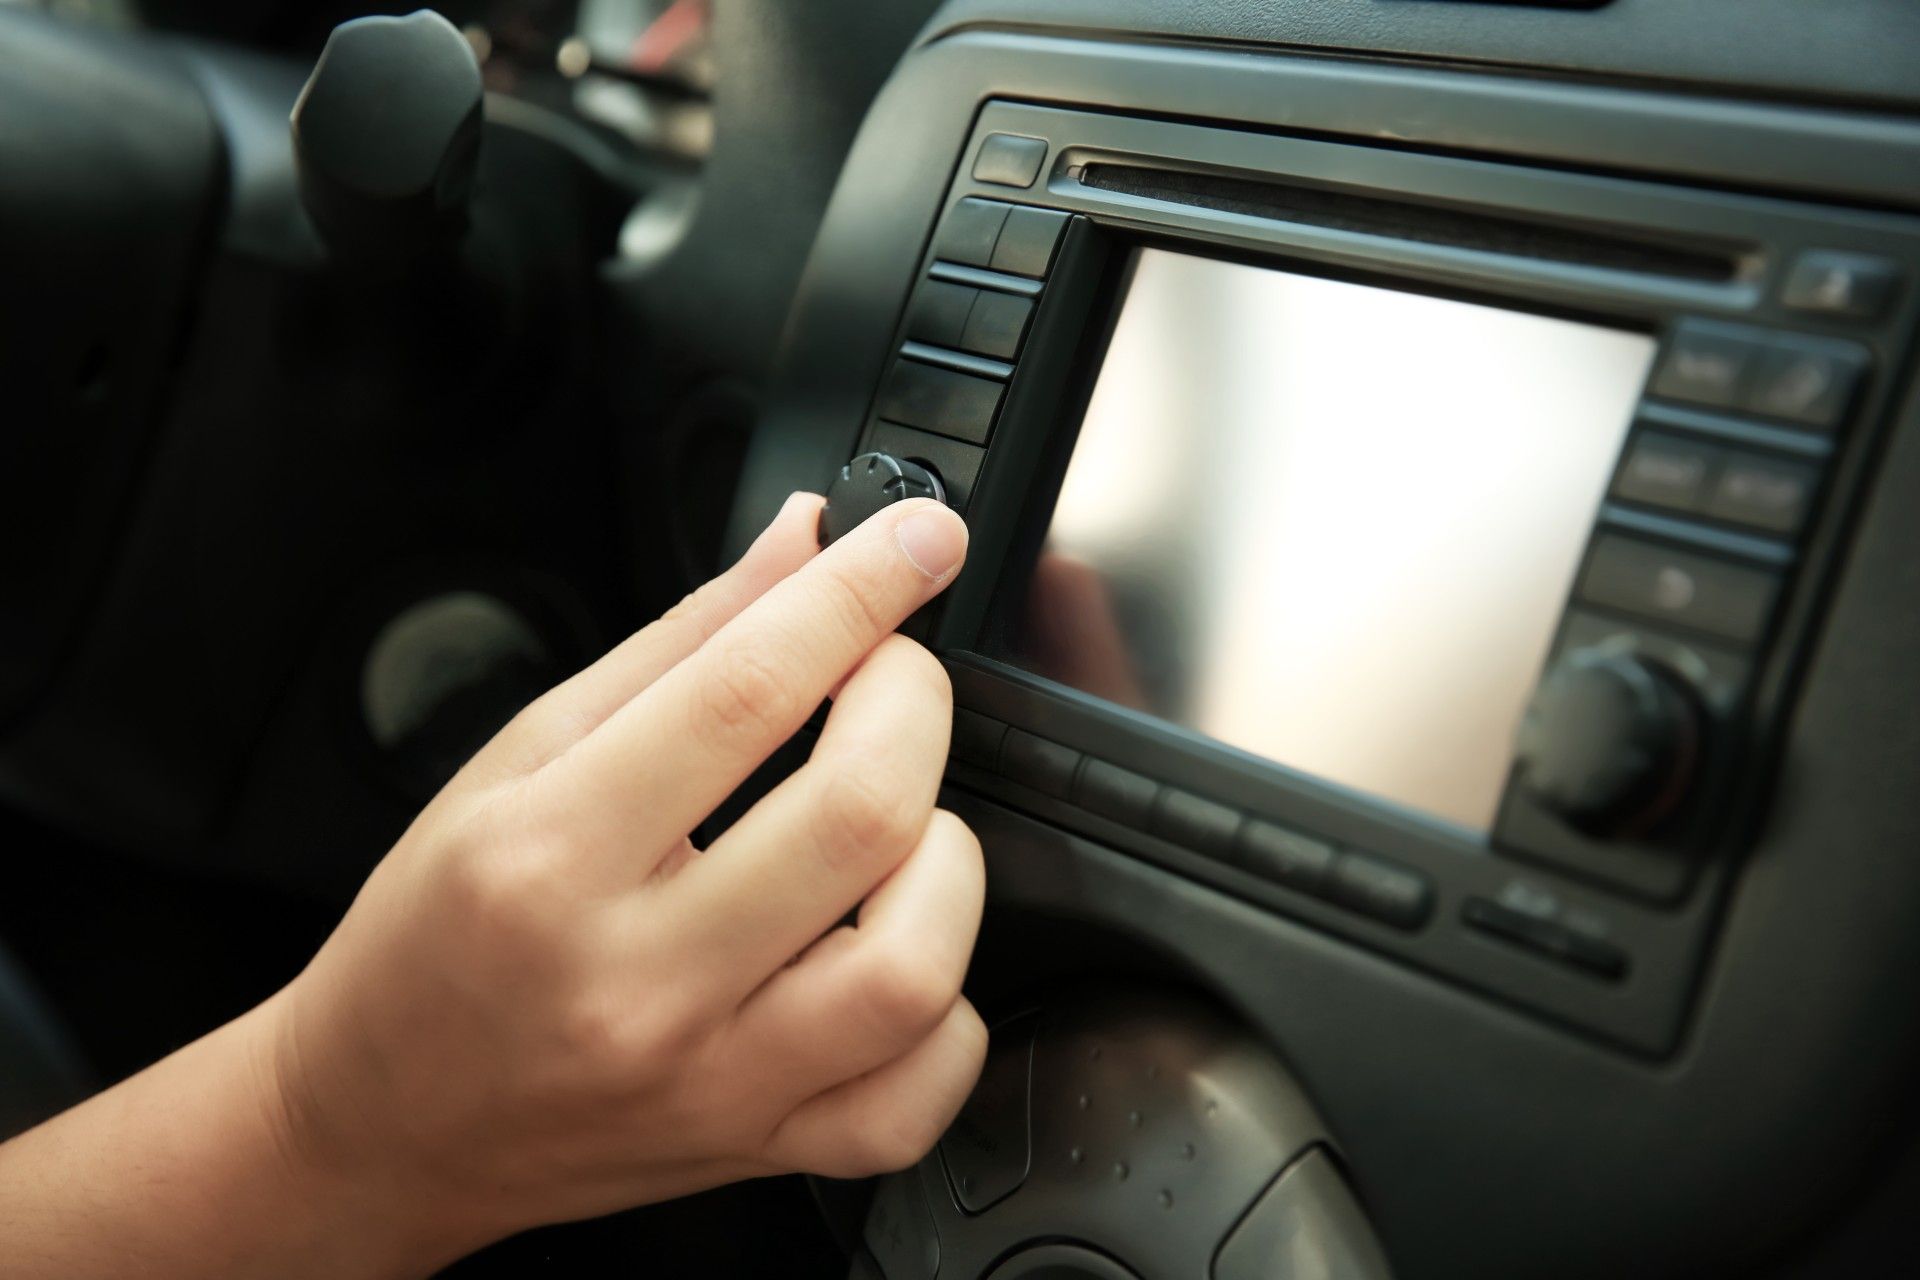 A driver's hand adjusts the volume on a car's infotainment system - GM